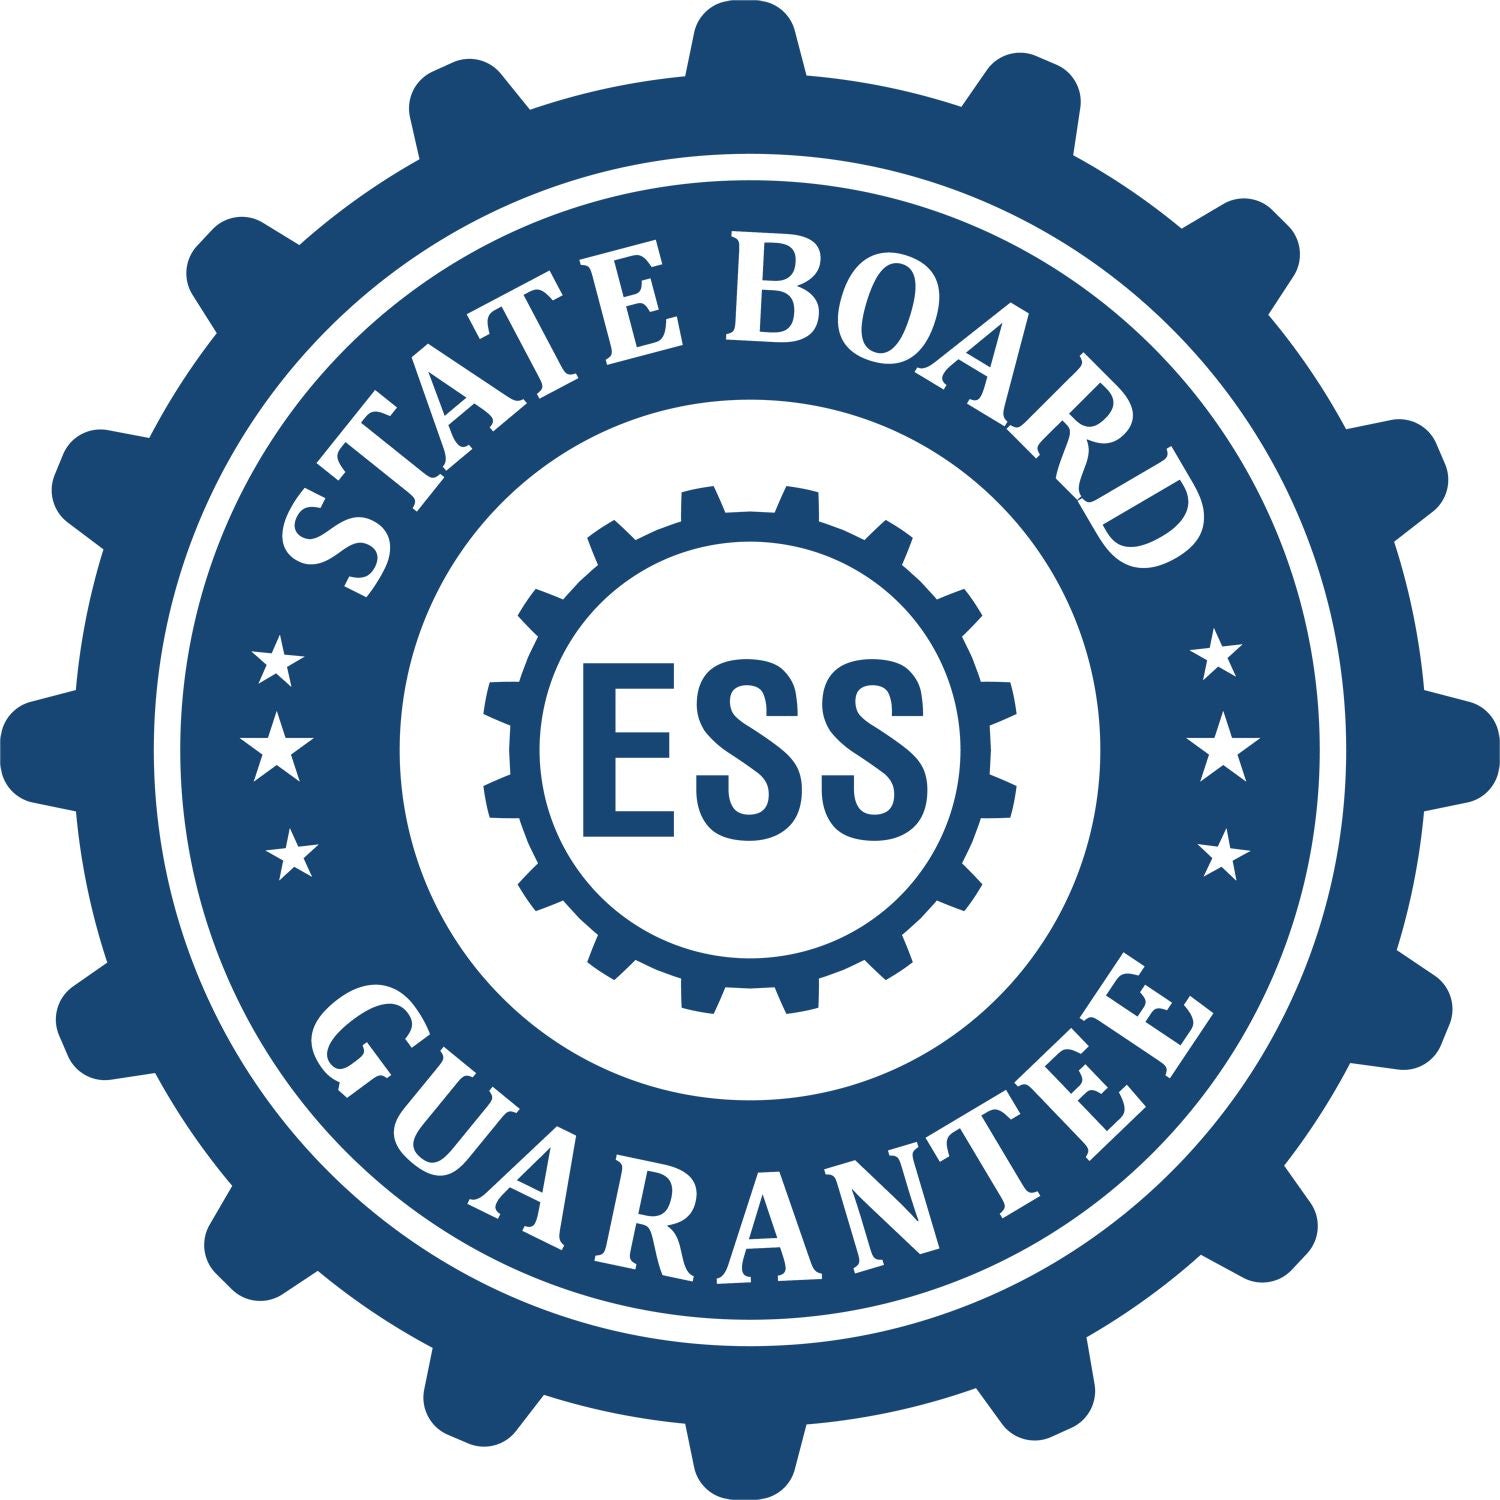 An emblem in a gear shape illustrating a state board guarantee for the Gift Alaska Geologist Seal